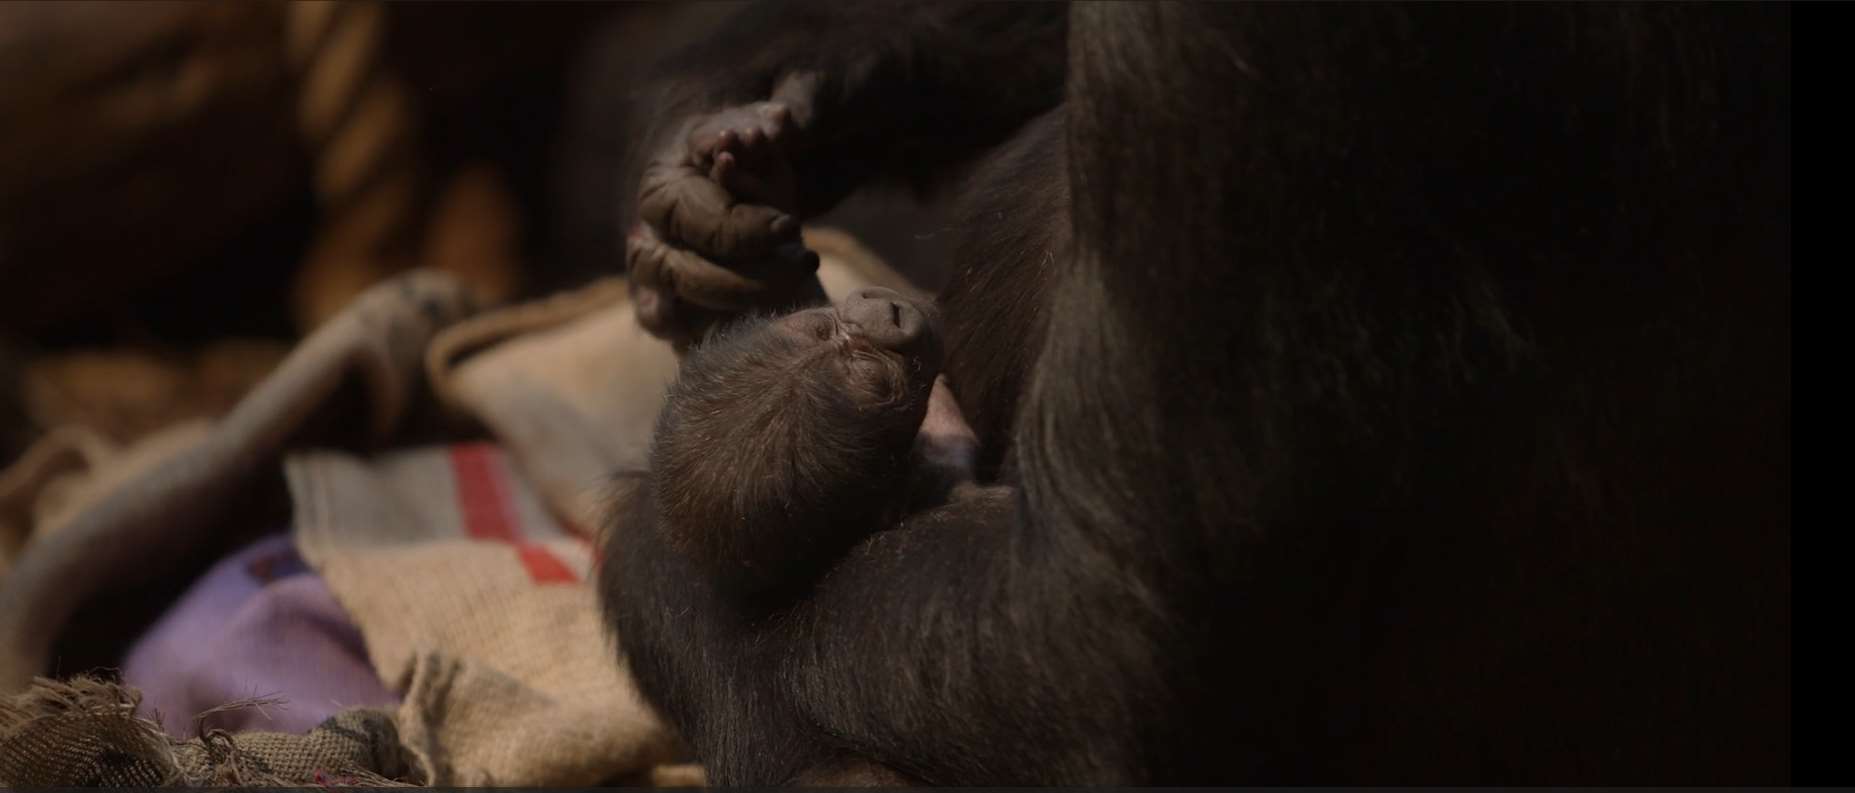 The western lowland gorilla infant has yet to be named and its sex has not been determined (London Zoo)